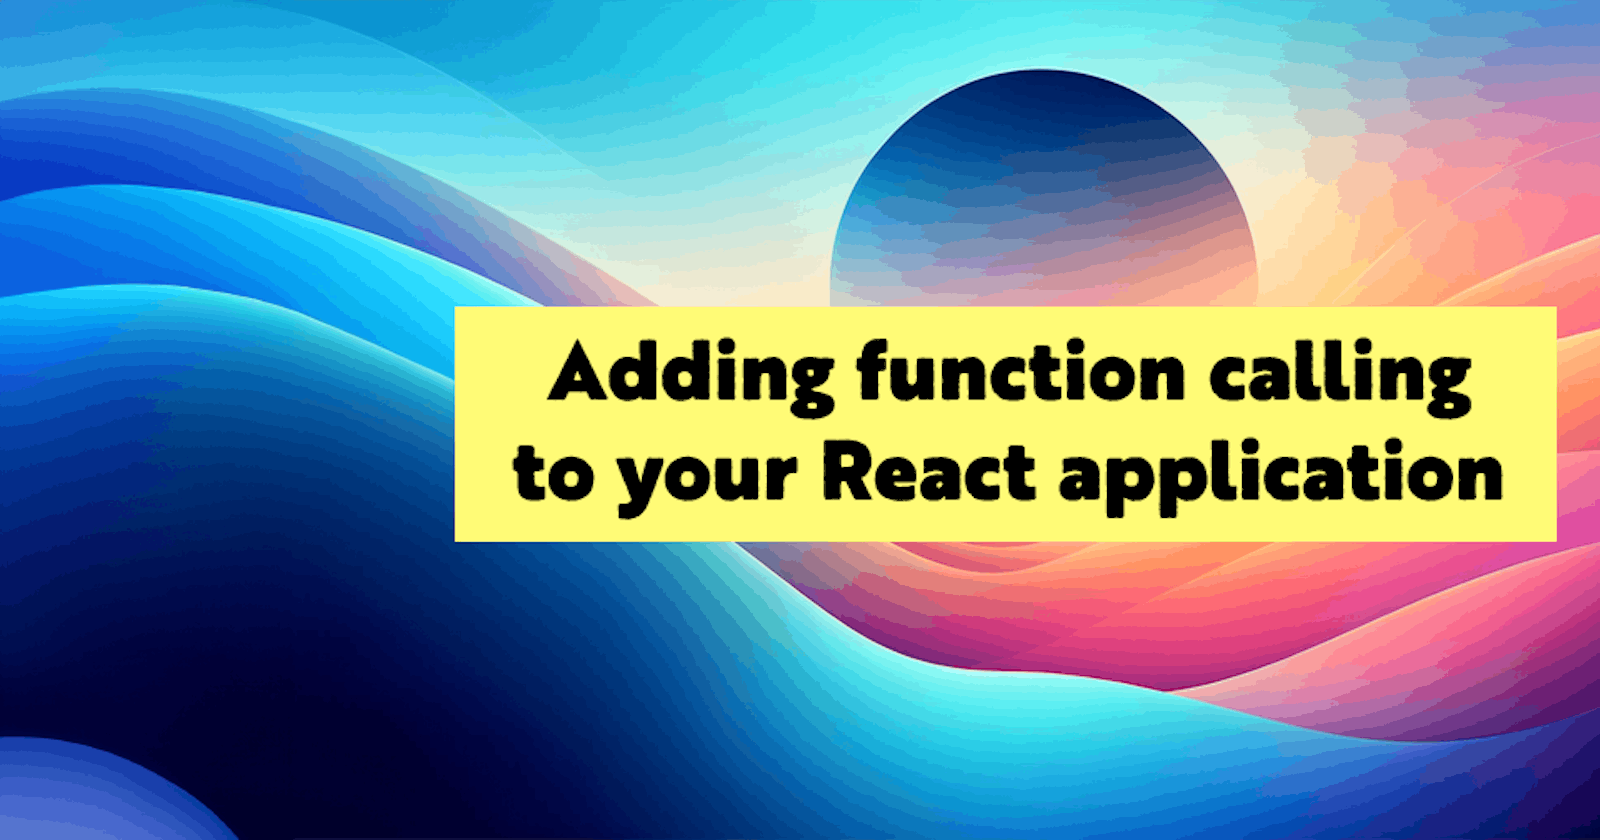 Adding function calling to your React application